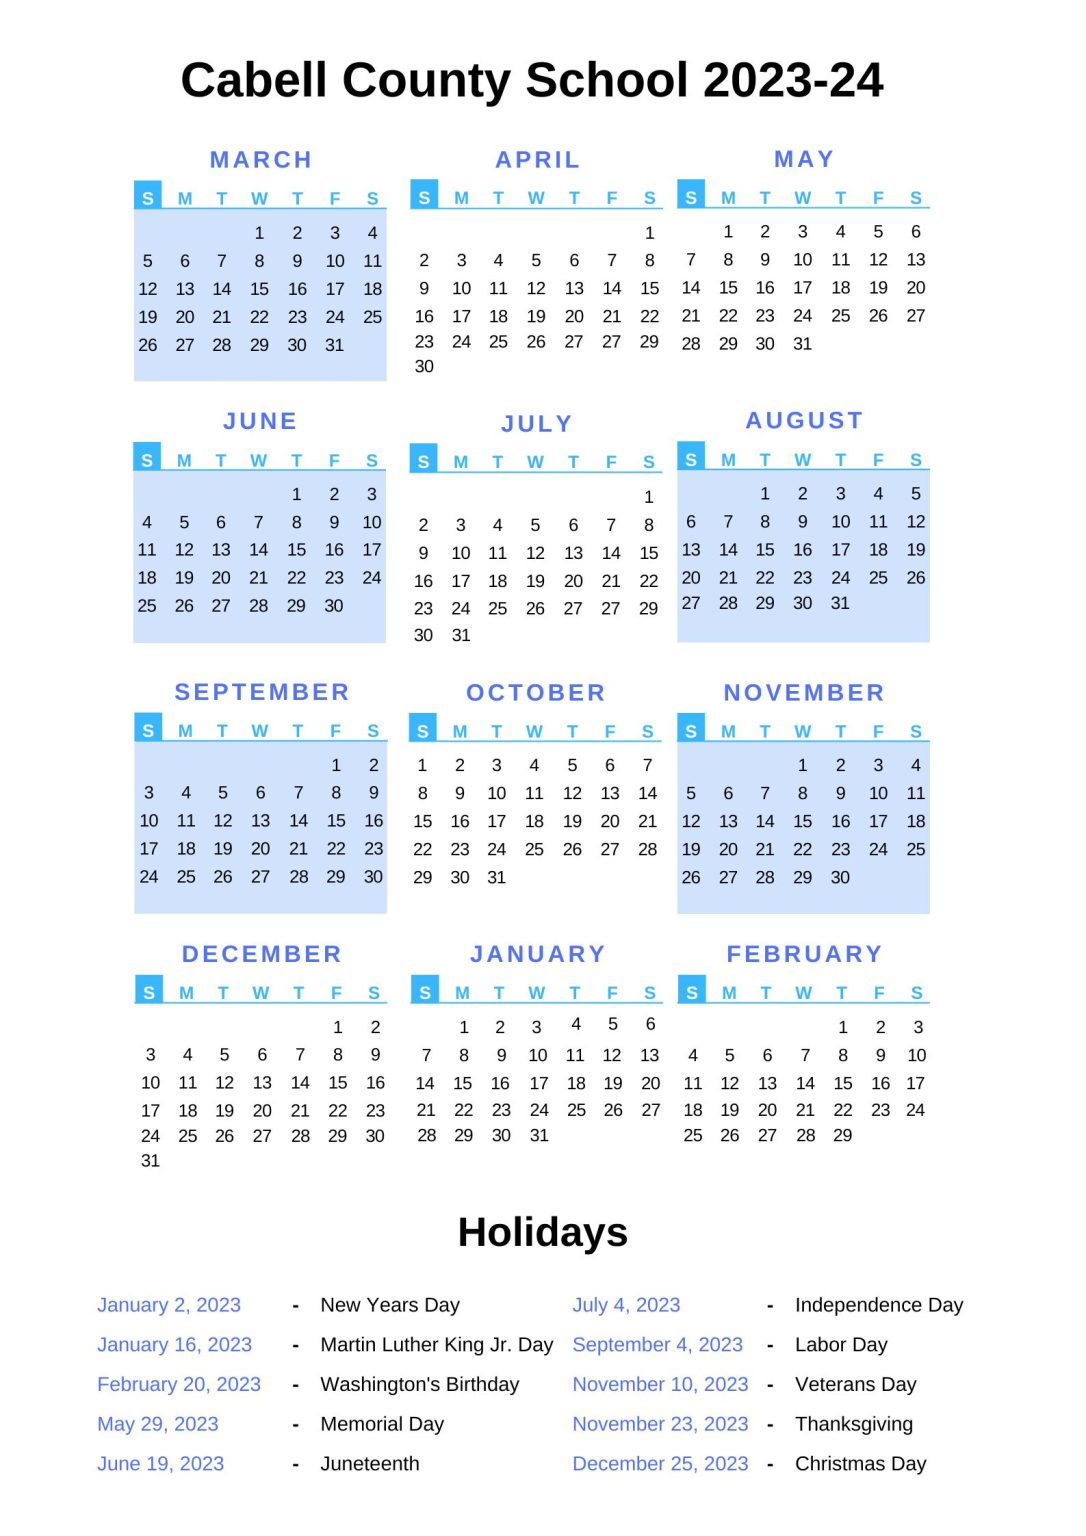 Cabell County Schools Calendar [CCS] 202324 with Holidays